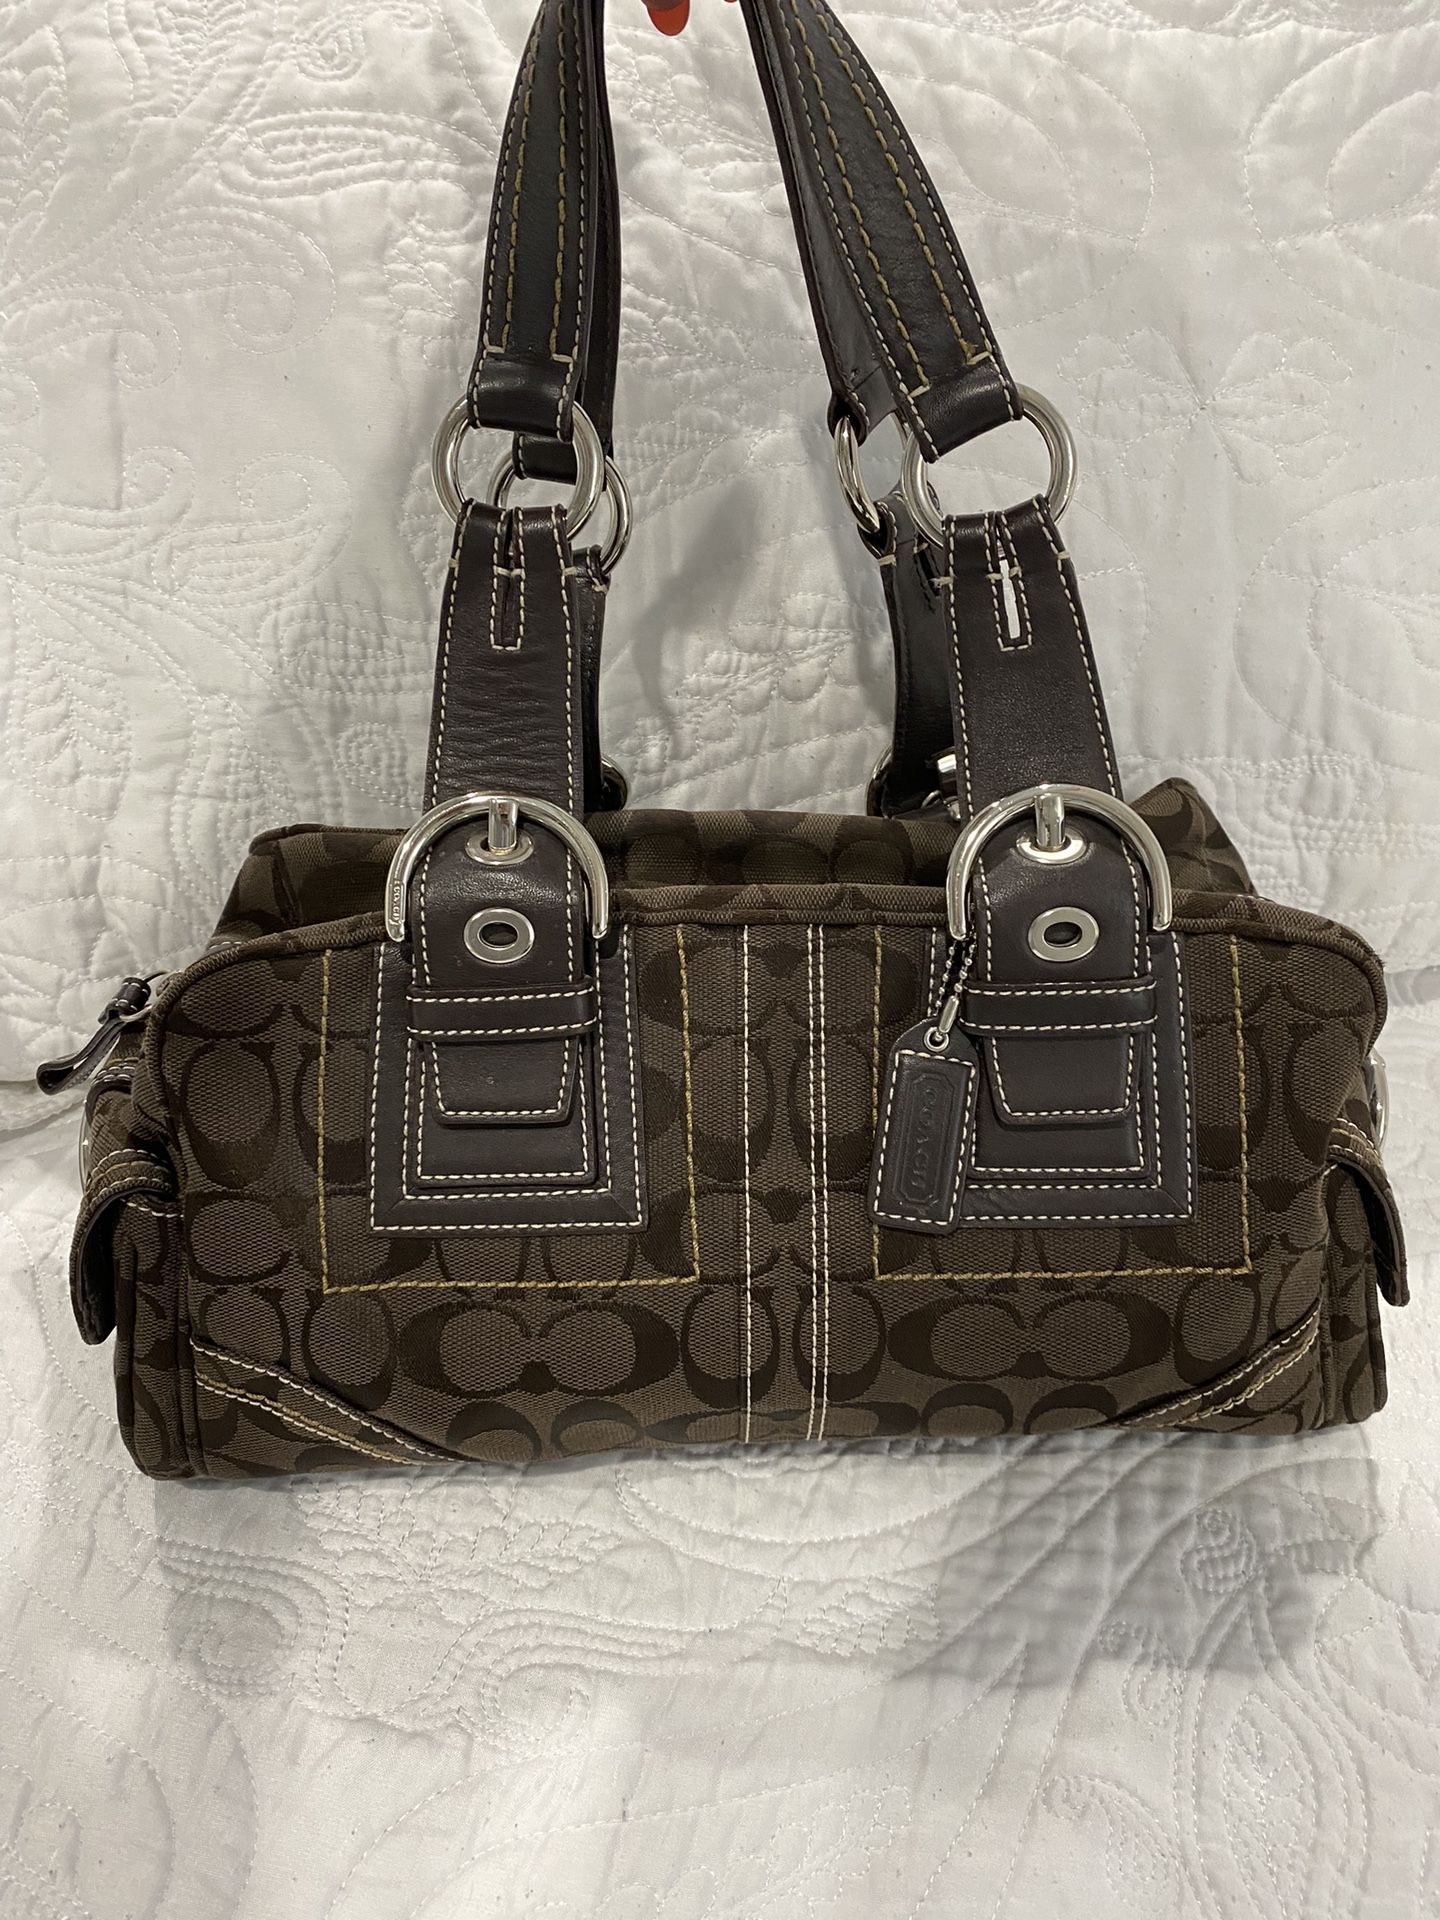 COACH doctor bag handbag satchel in signature logo canvas-color brown for  Sale in Cary, NC - OfferUp